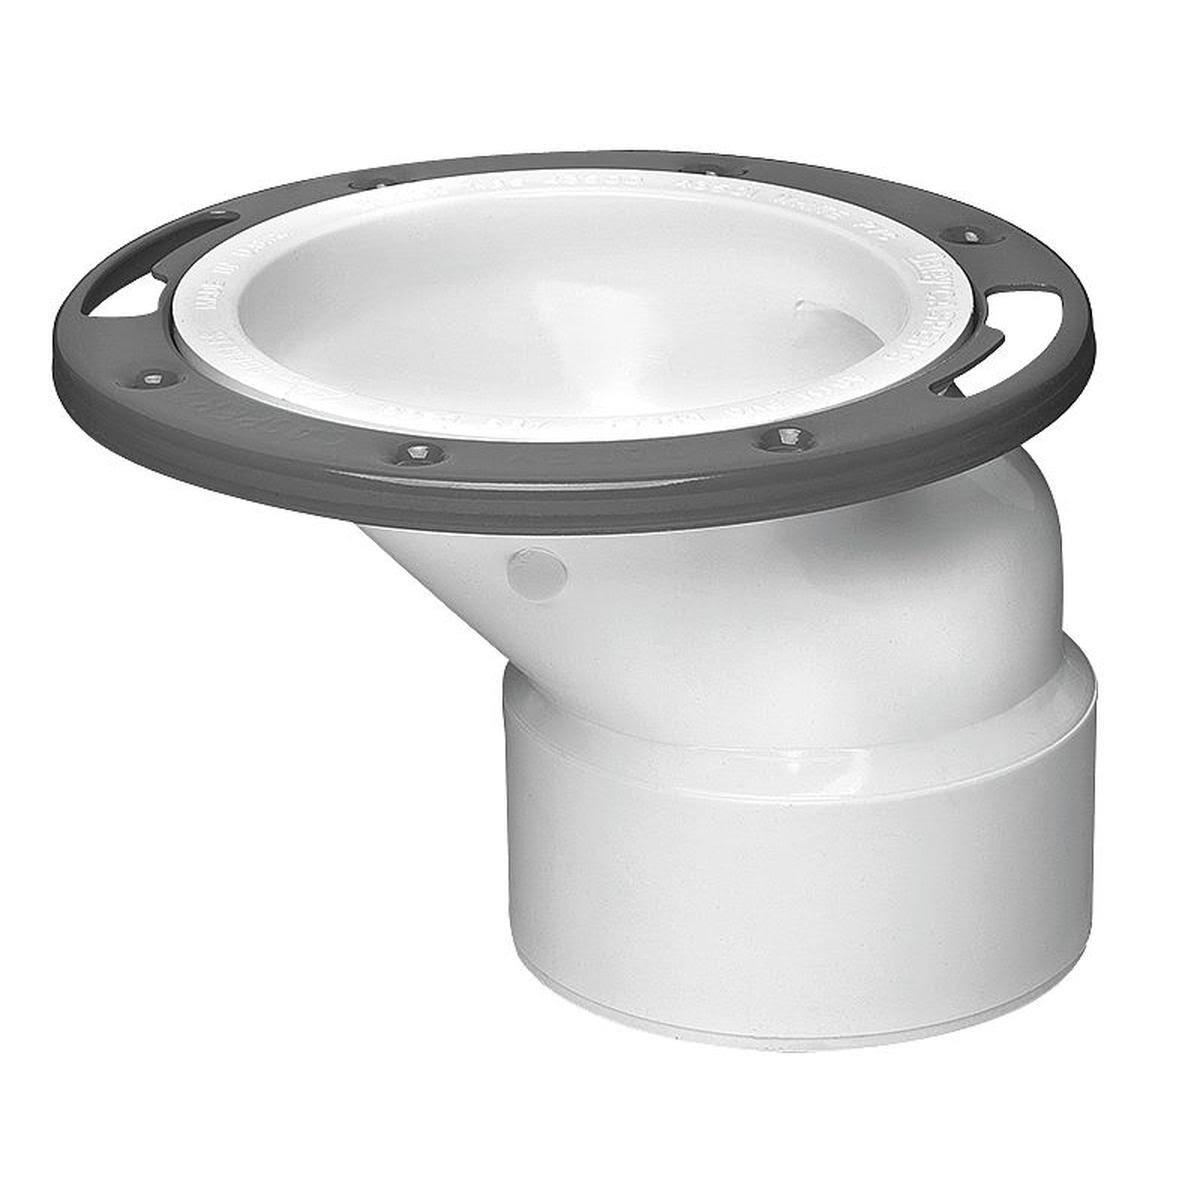 Oatey 43501 Level-fit Offset Closet Flange - with Ring, White, 3" X 4"